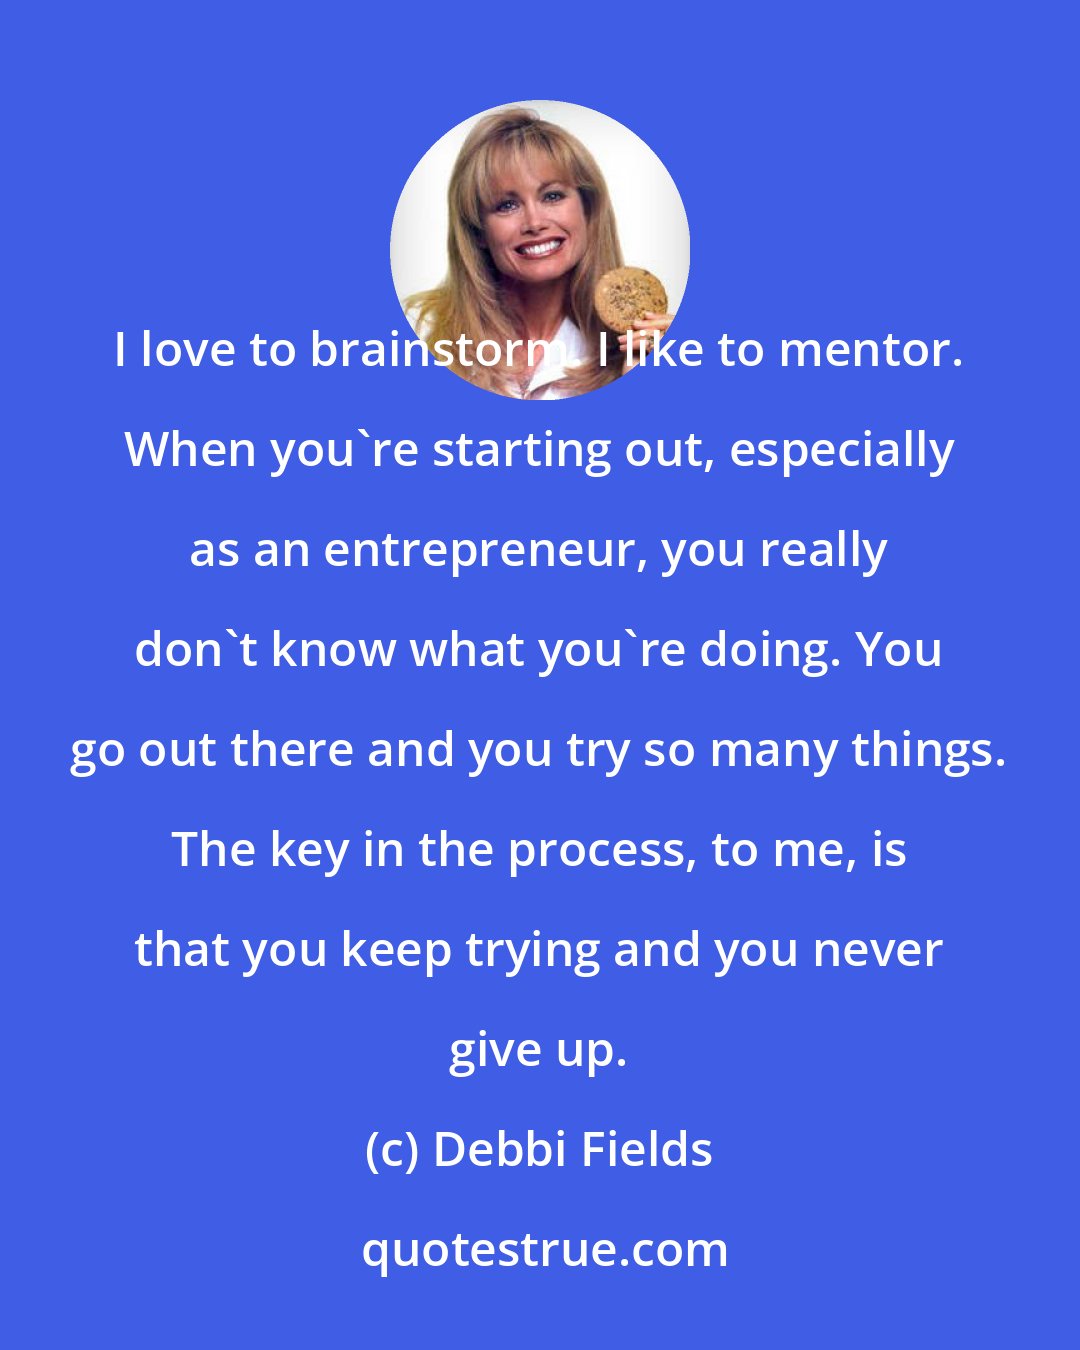 Debbi Fields: I love to brainstorm. I like to mentor. When you're starting out, especially as an entrepreneur, you really don't know what you're doing. You go out there and you try so many things. The key in the process, to me, is that you keep trying and you never give up.